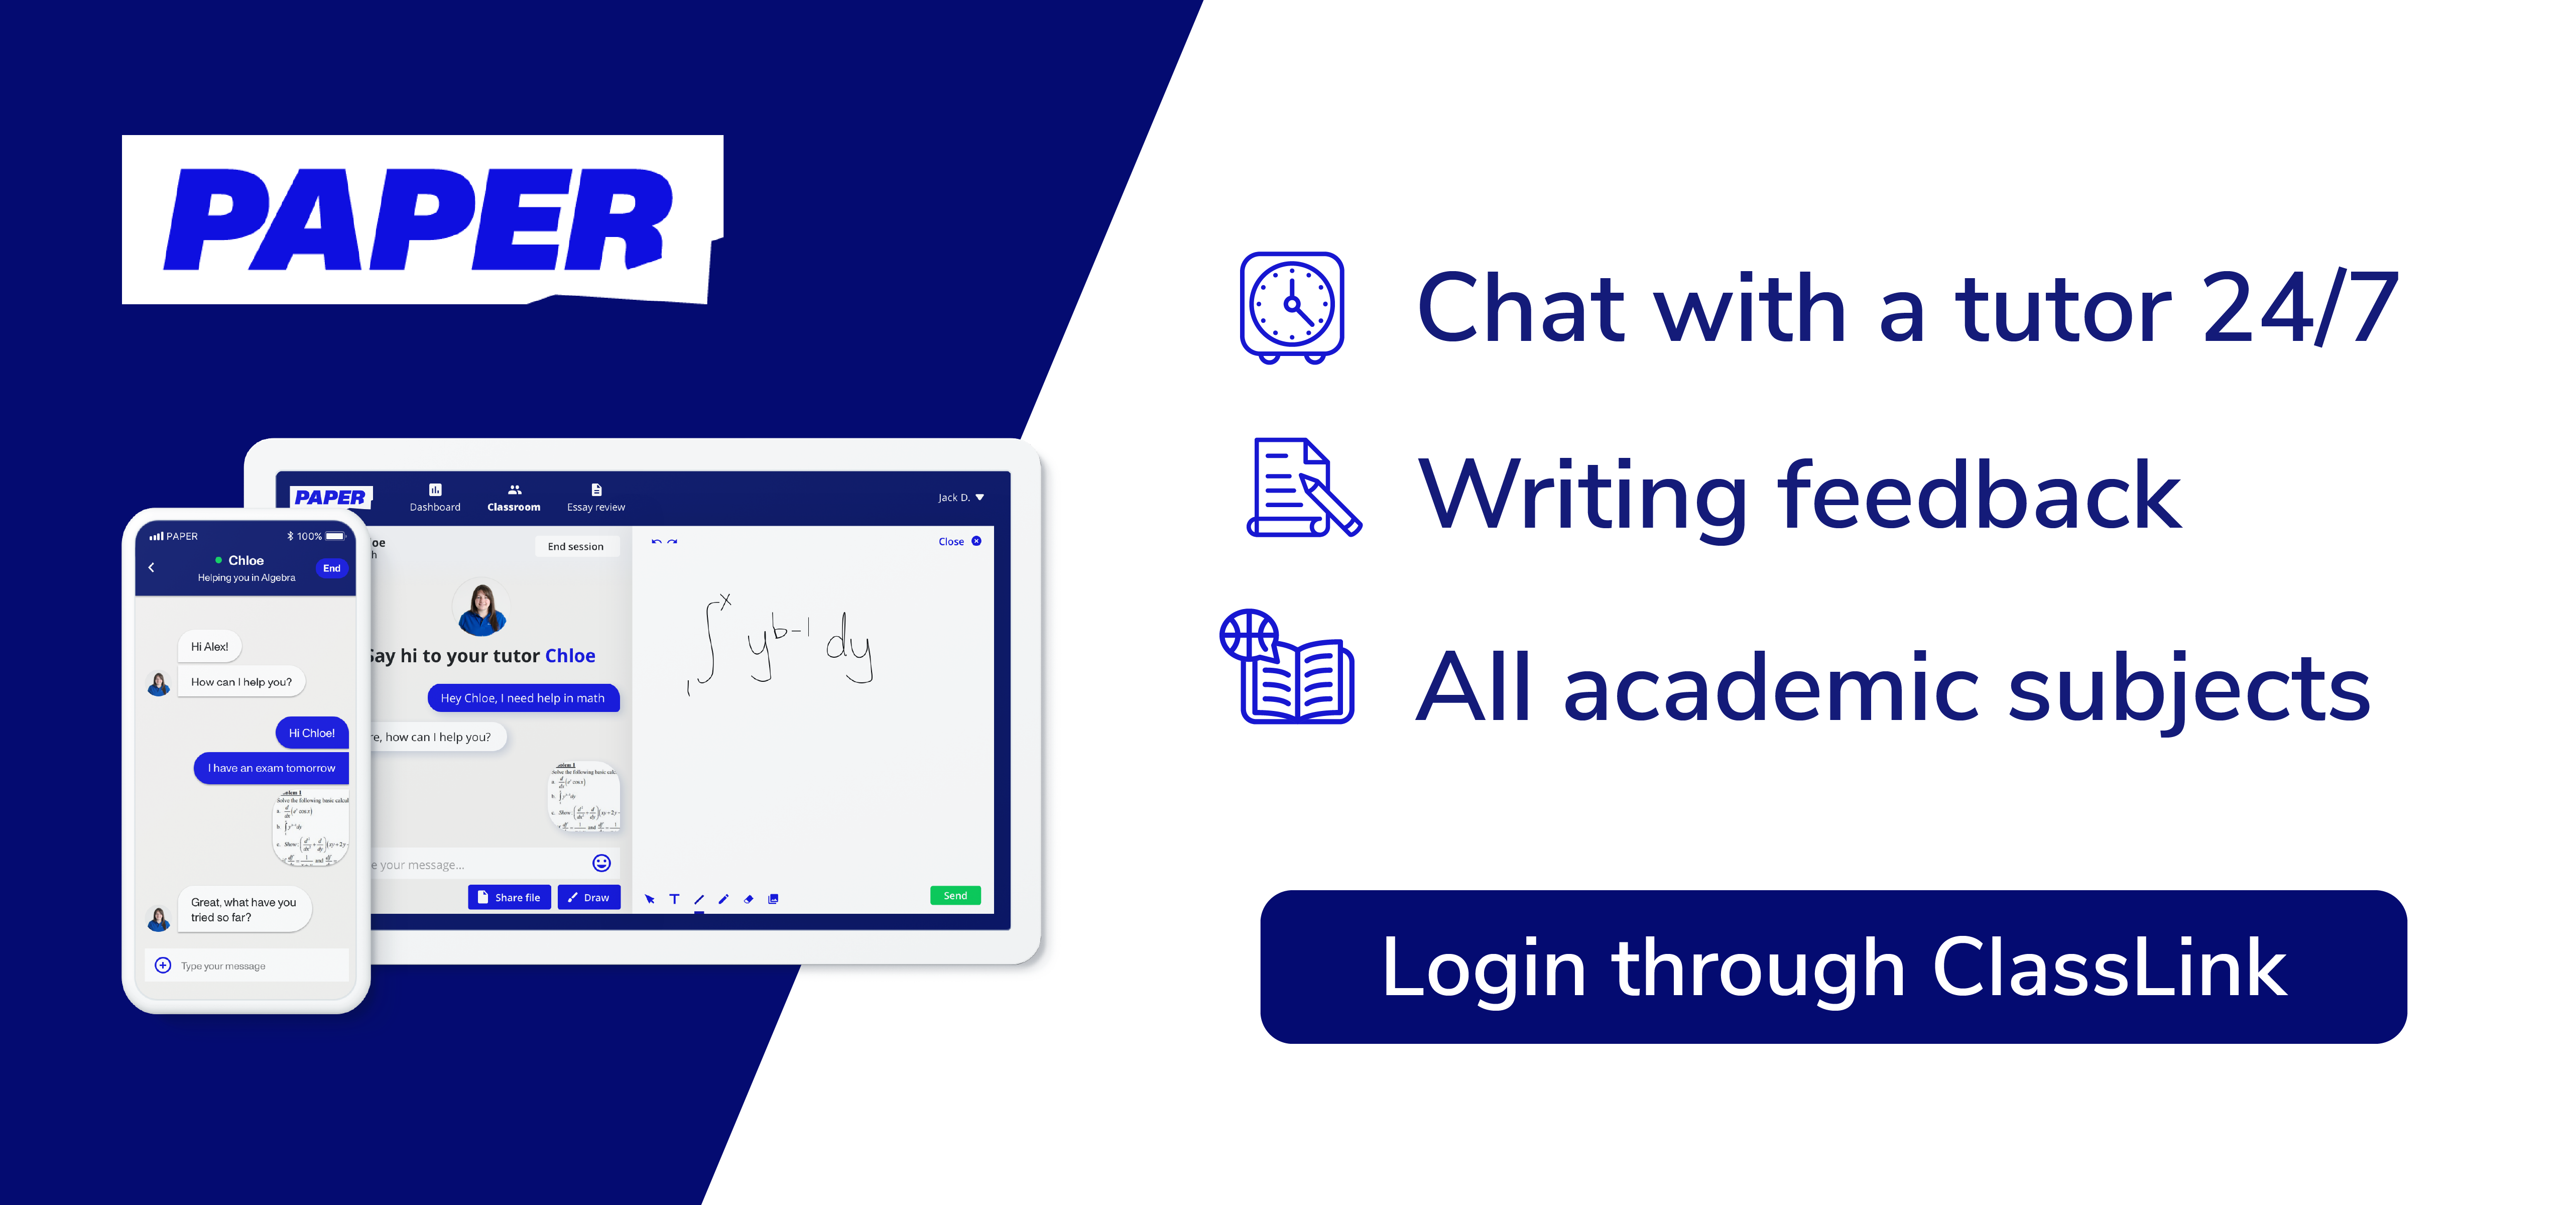 Paper, chat with a tutor 24/7, writing feedback, all academic subjects login through ClassLink